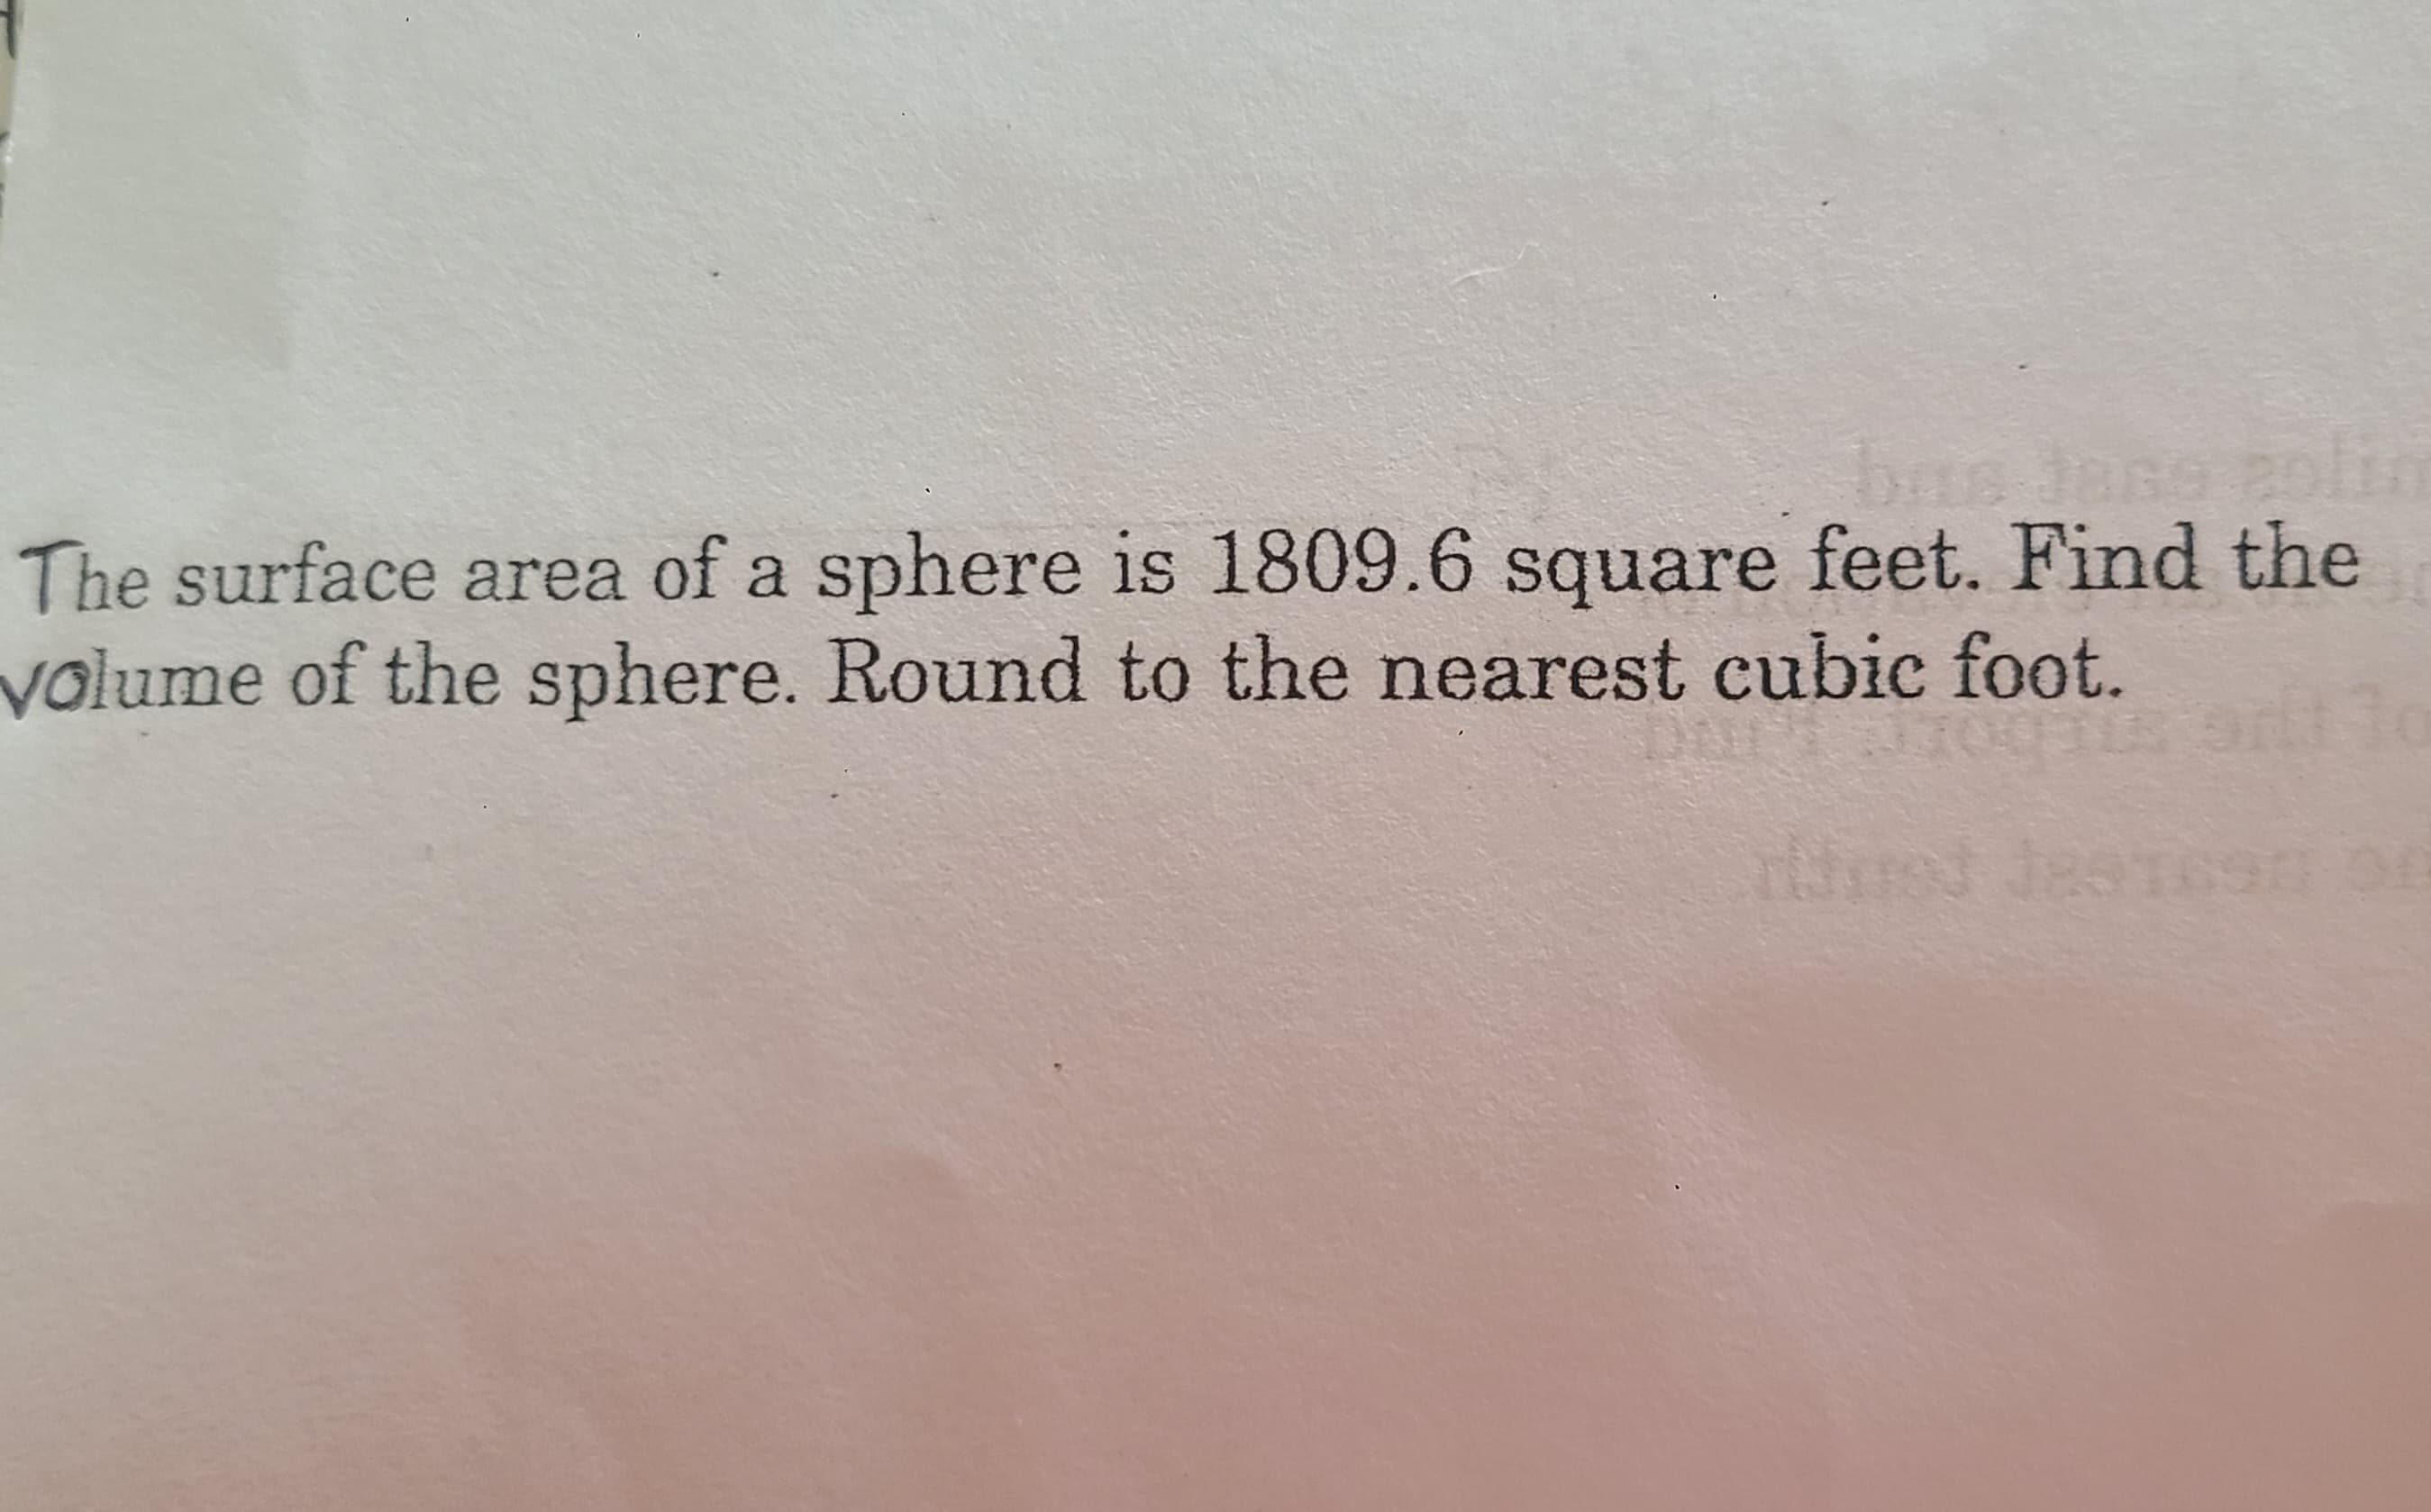 The surface area of a sphere is 1809.6 square feet. Find the
volume of the sphere. Round to the nearest cubic foot.
$700TLE
16